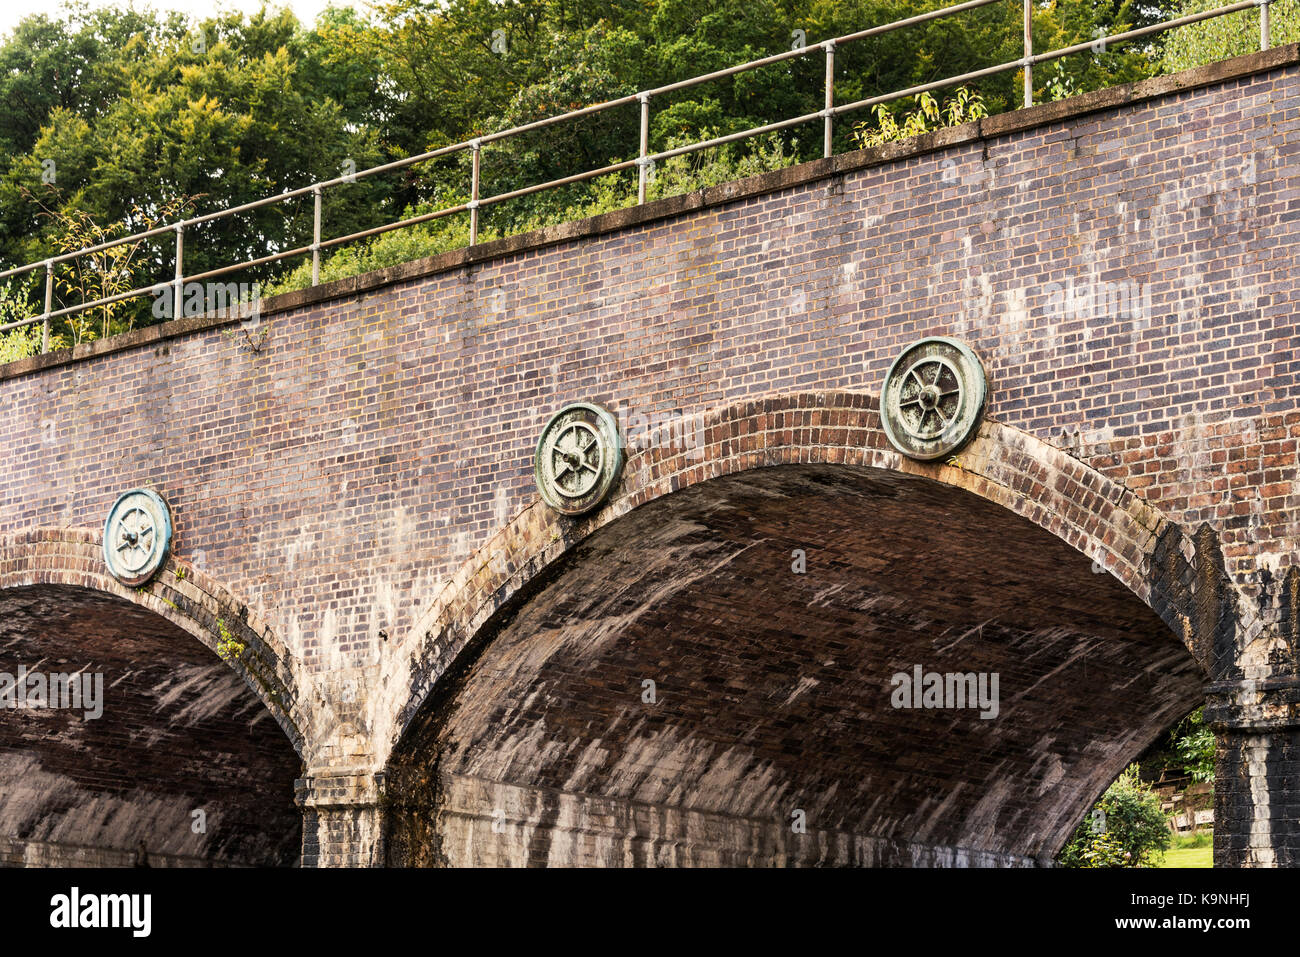 Viaduct, Museum of Iron, Telford. Darby Houses. Stock Photo